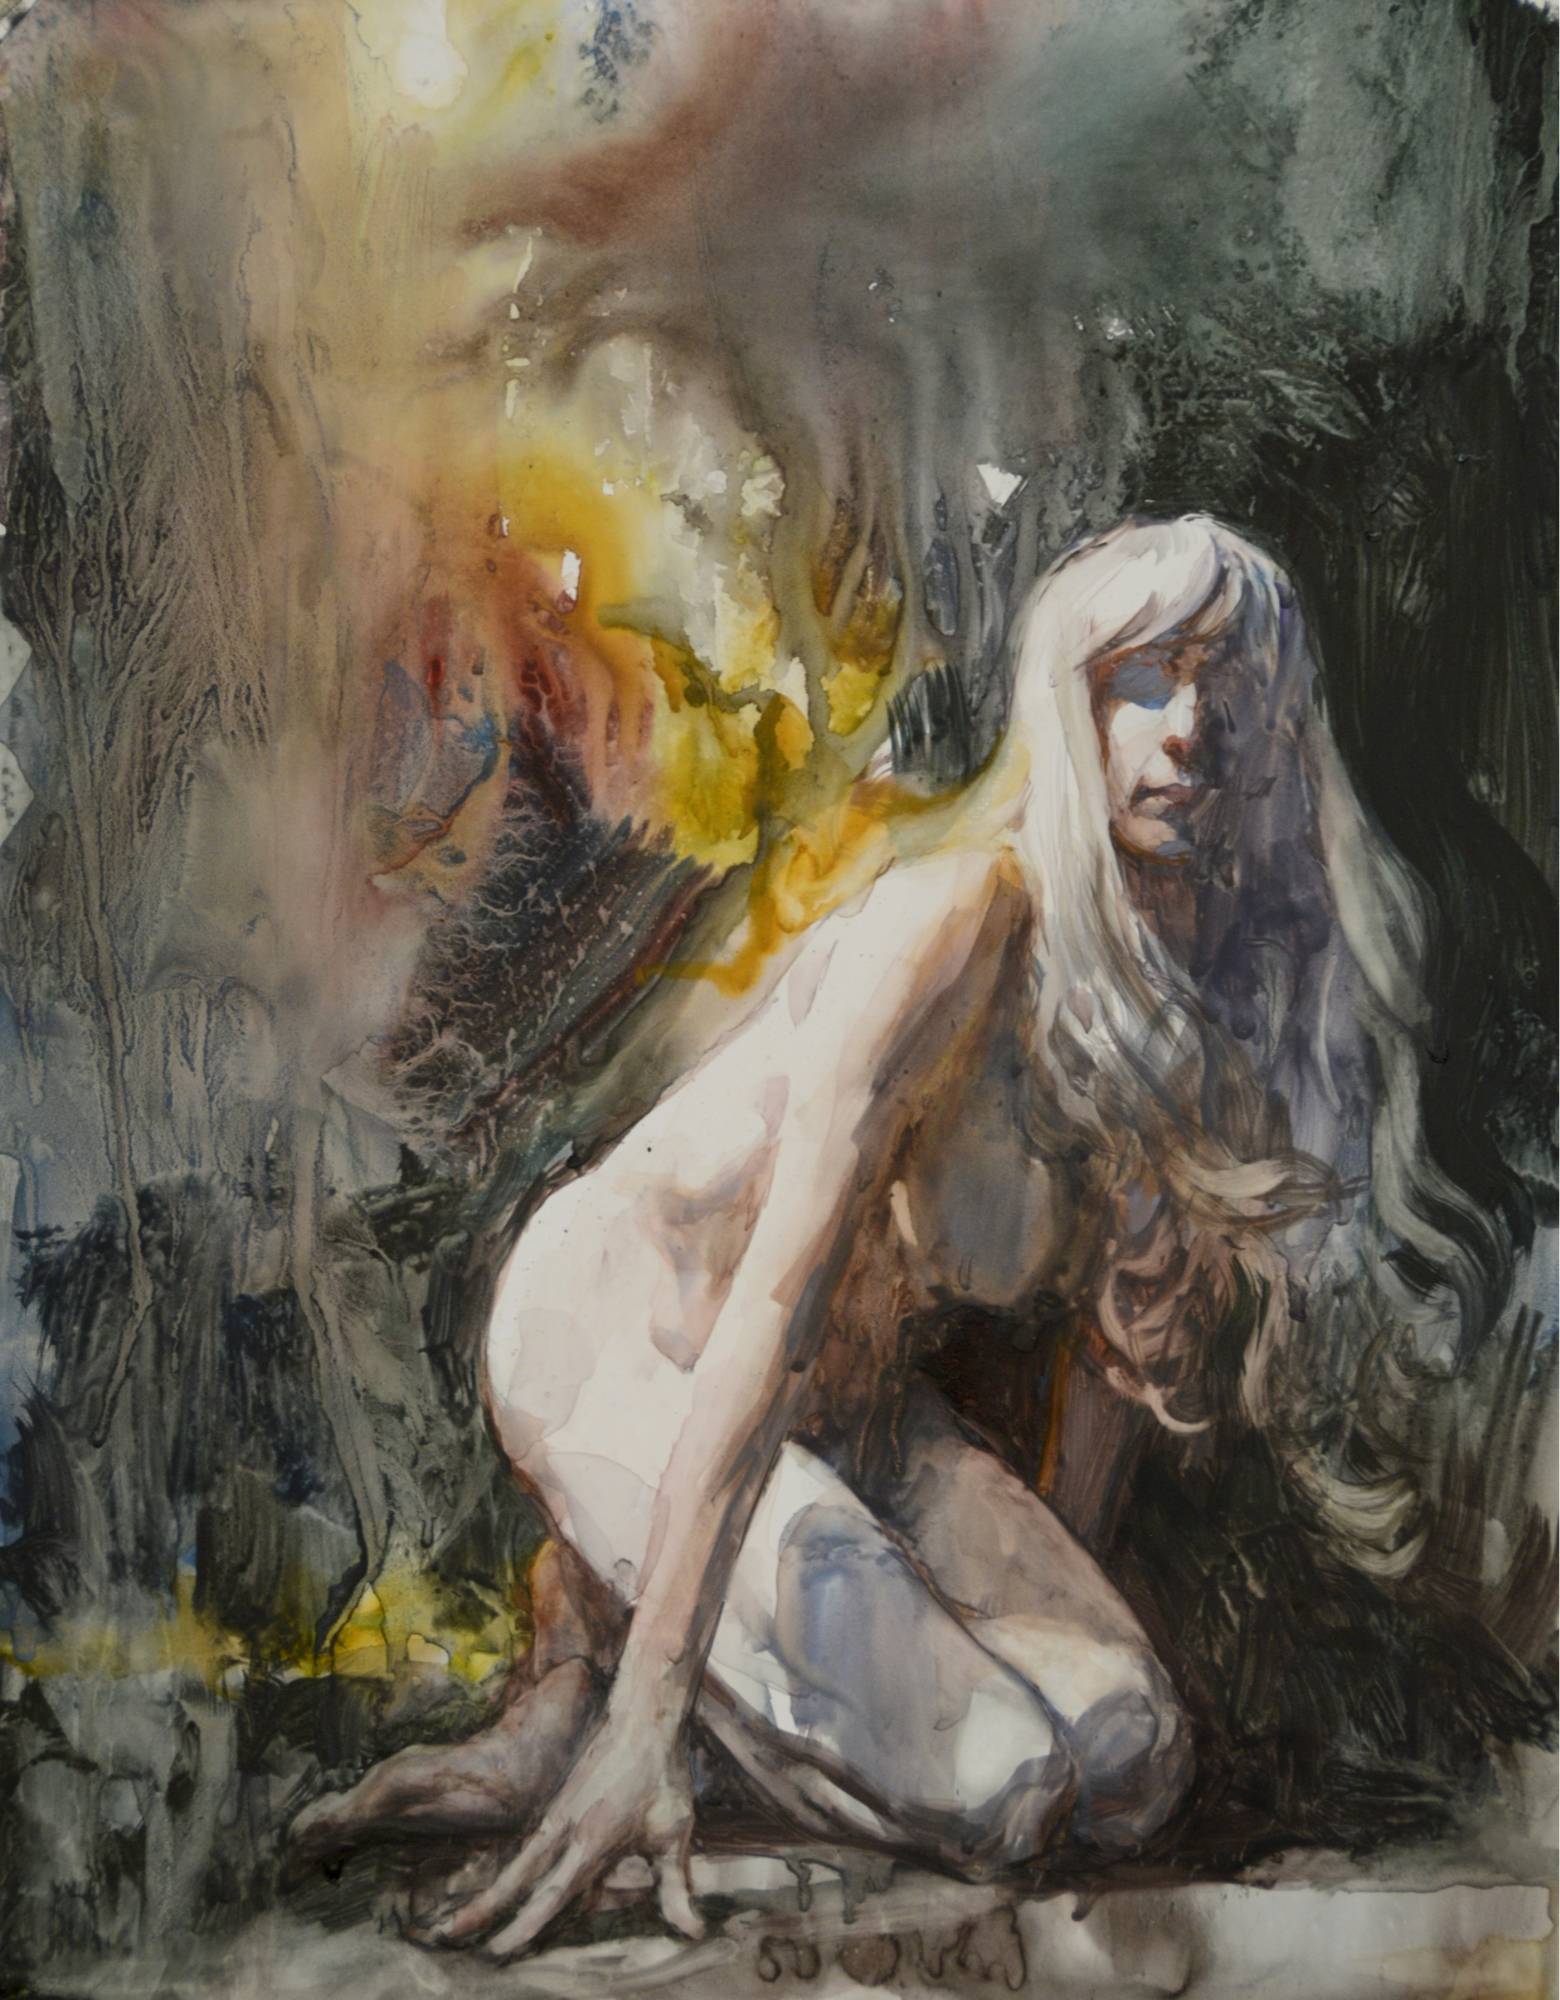 watercolor of a pale nude figure crouching in front of an abstract, fiery background.